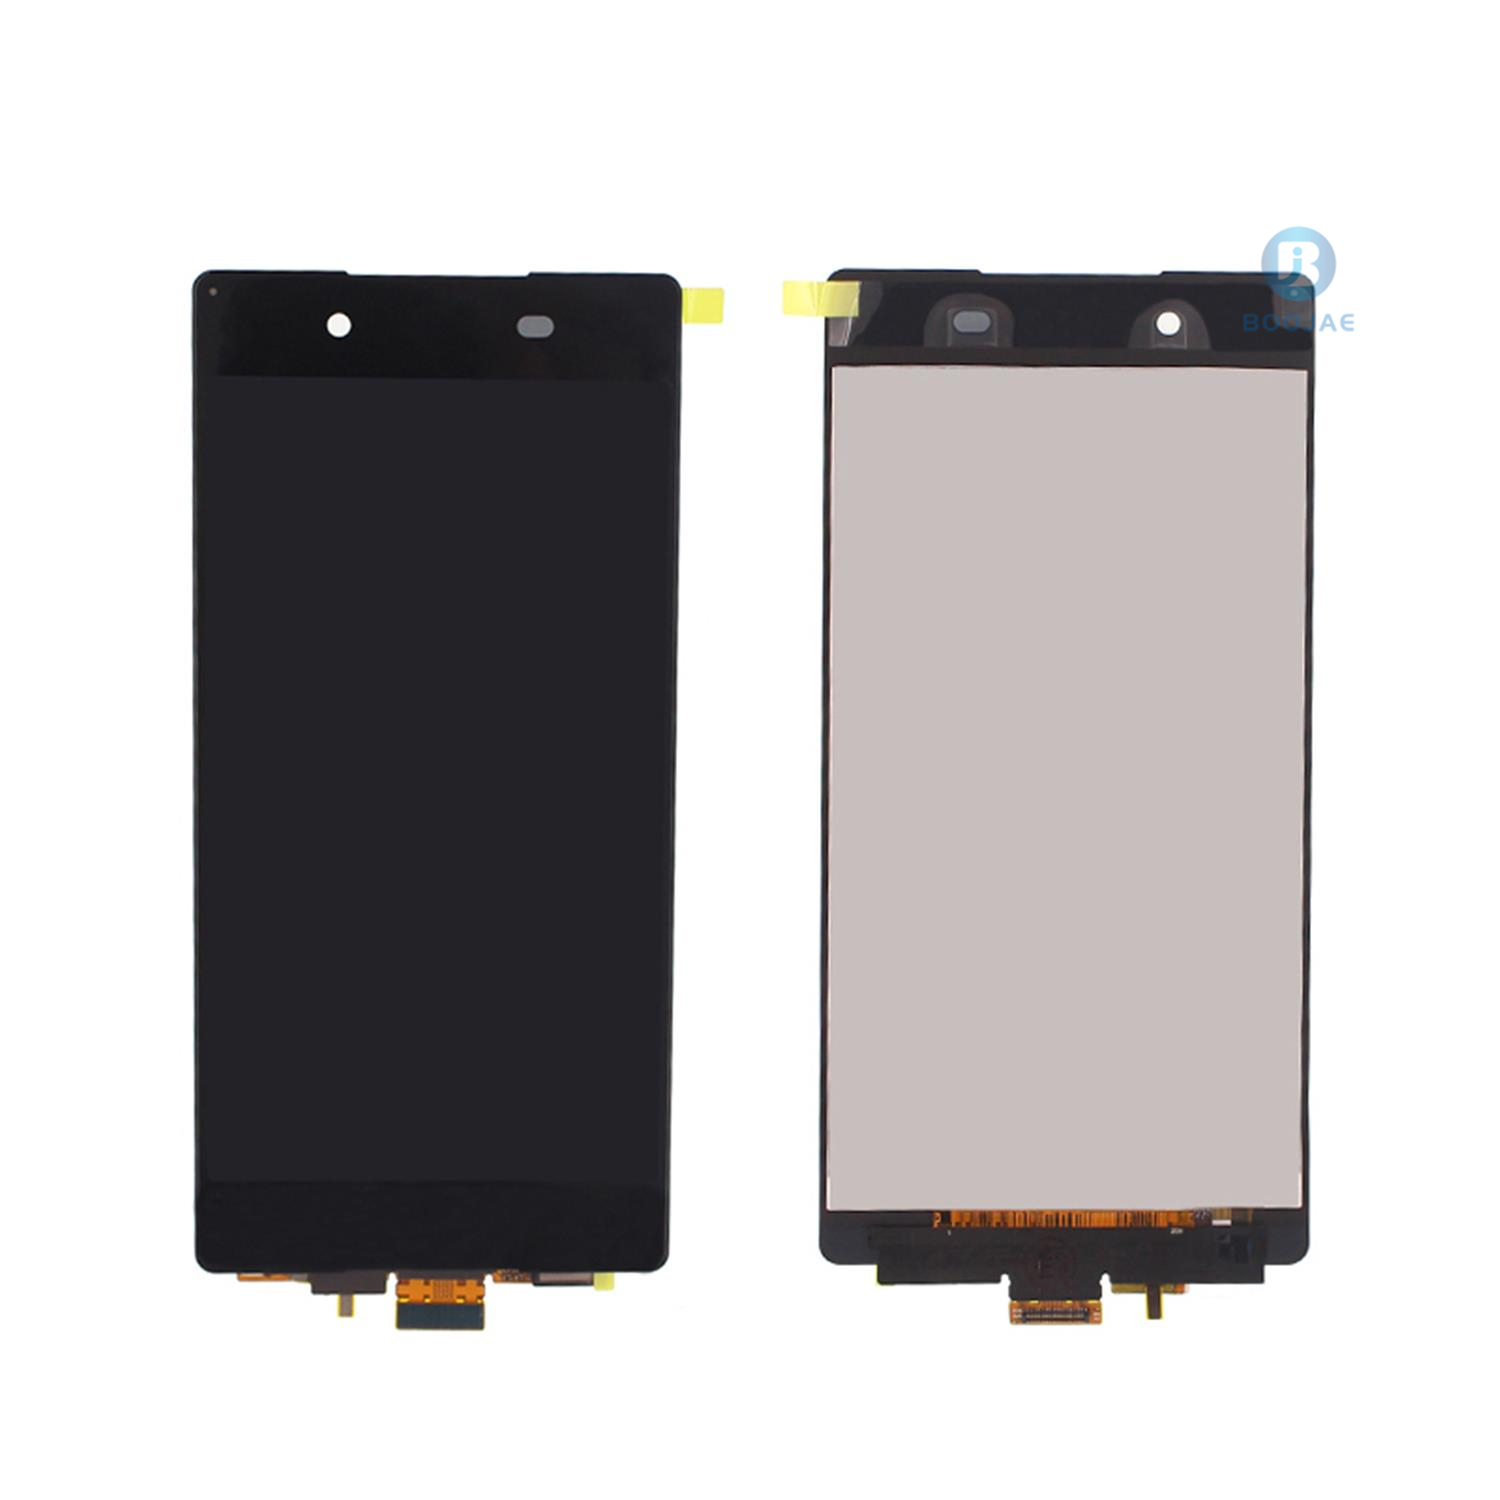 For Sony Xperia Z4 LCD Screen Display and Touch Panel Digitizer Assembly Replacement